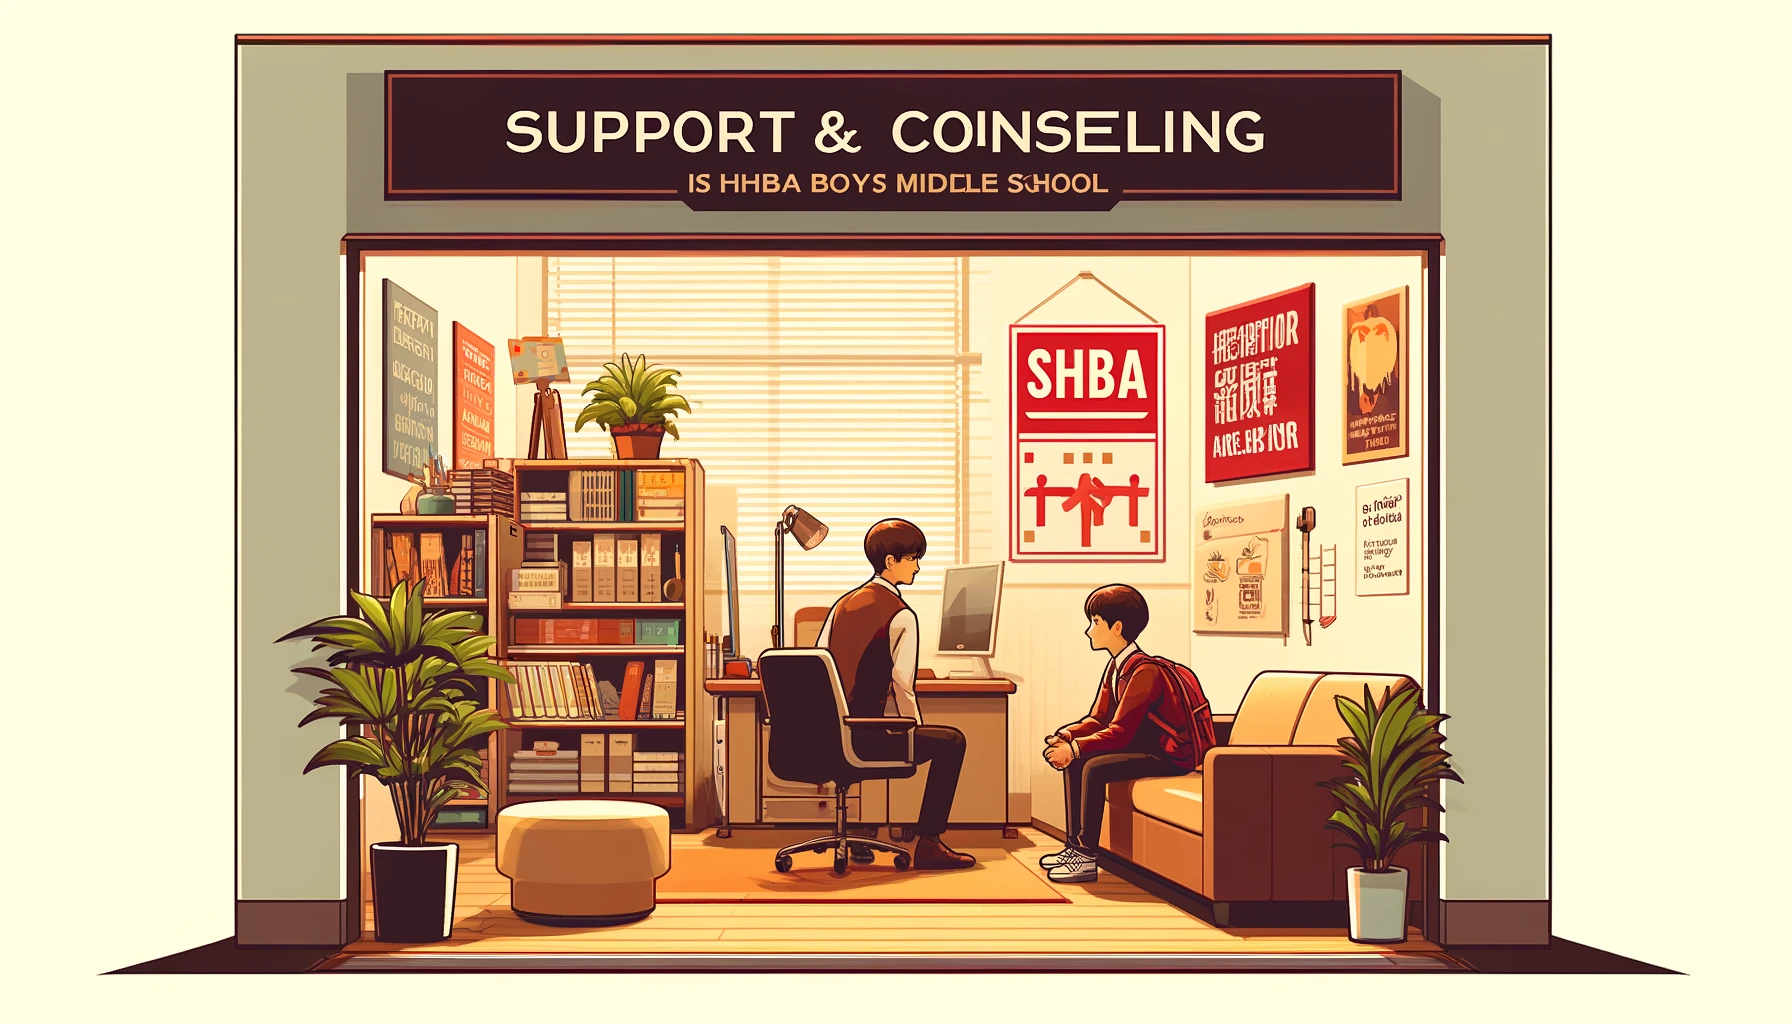 A support and counseling office at SHIBA Boys' Middle School, depicting a warm and welcoming environment. The scene shows a counselor in conversation with a student, surrounded by resources like books, motivational posters, and a comfortable seating area. The name 'SHIBA' is subtly included on materials and décor, emphasizing the school's commitment to student support in a caring setting.